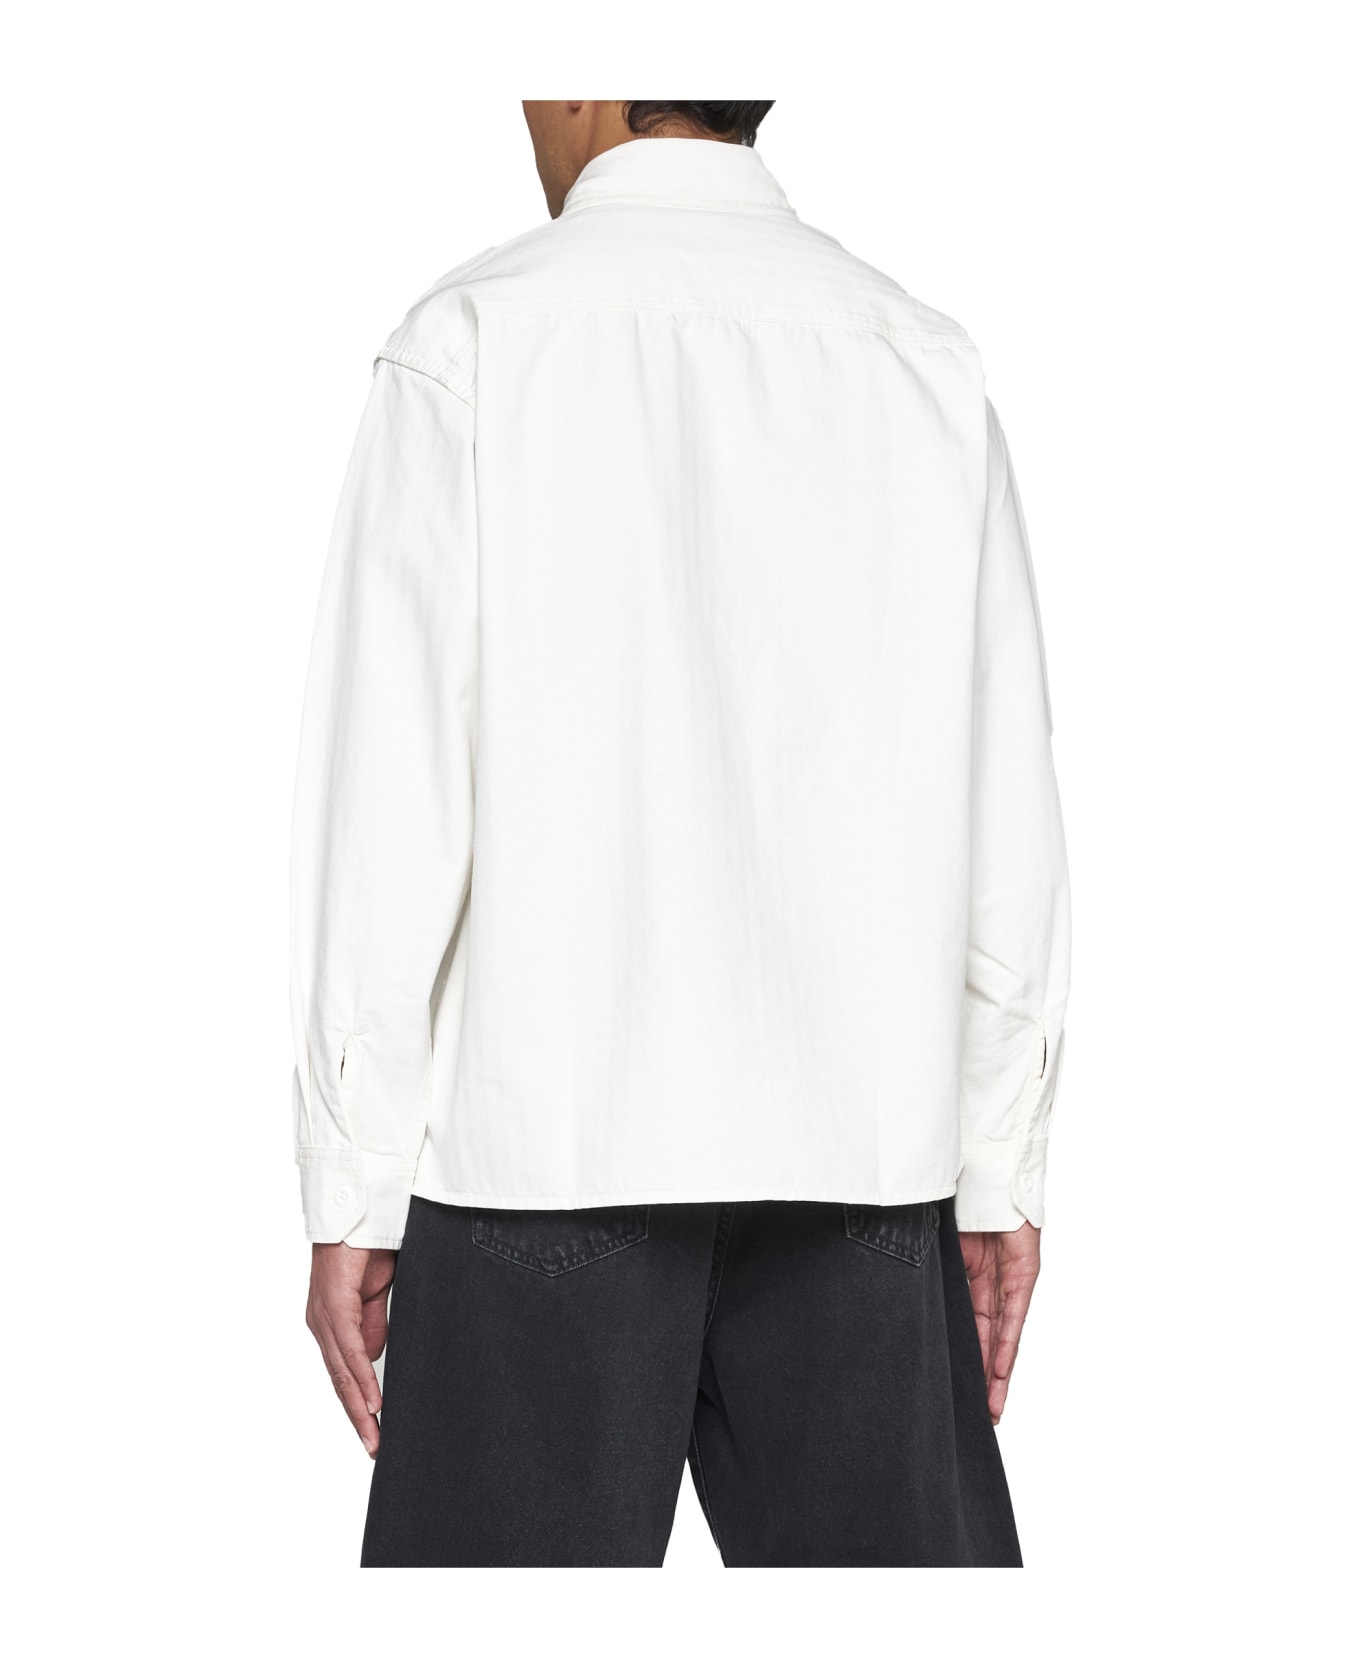 Carhartt Jacket - Off-white rinsed